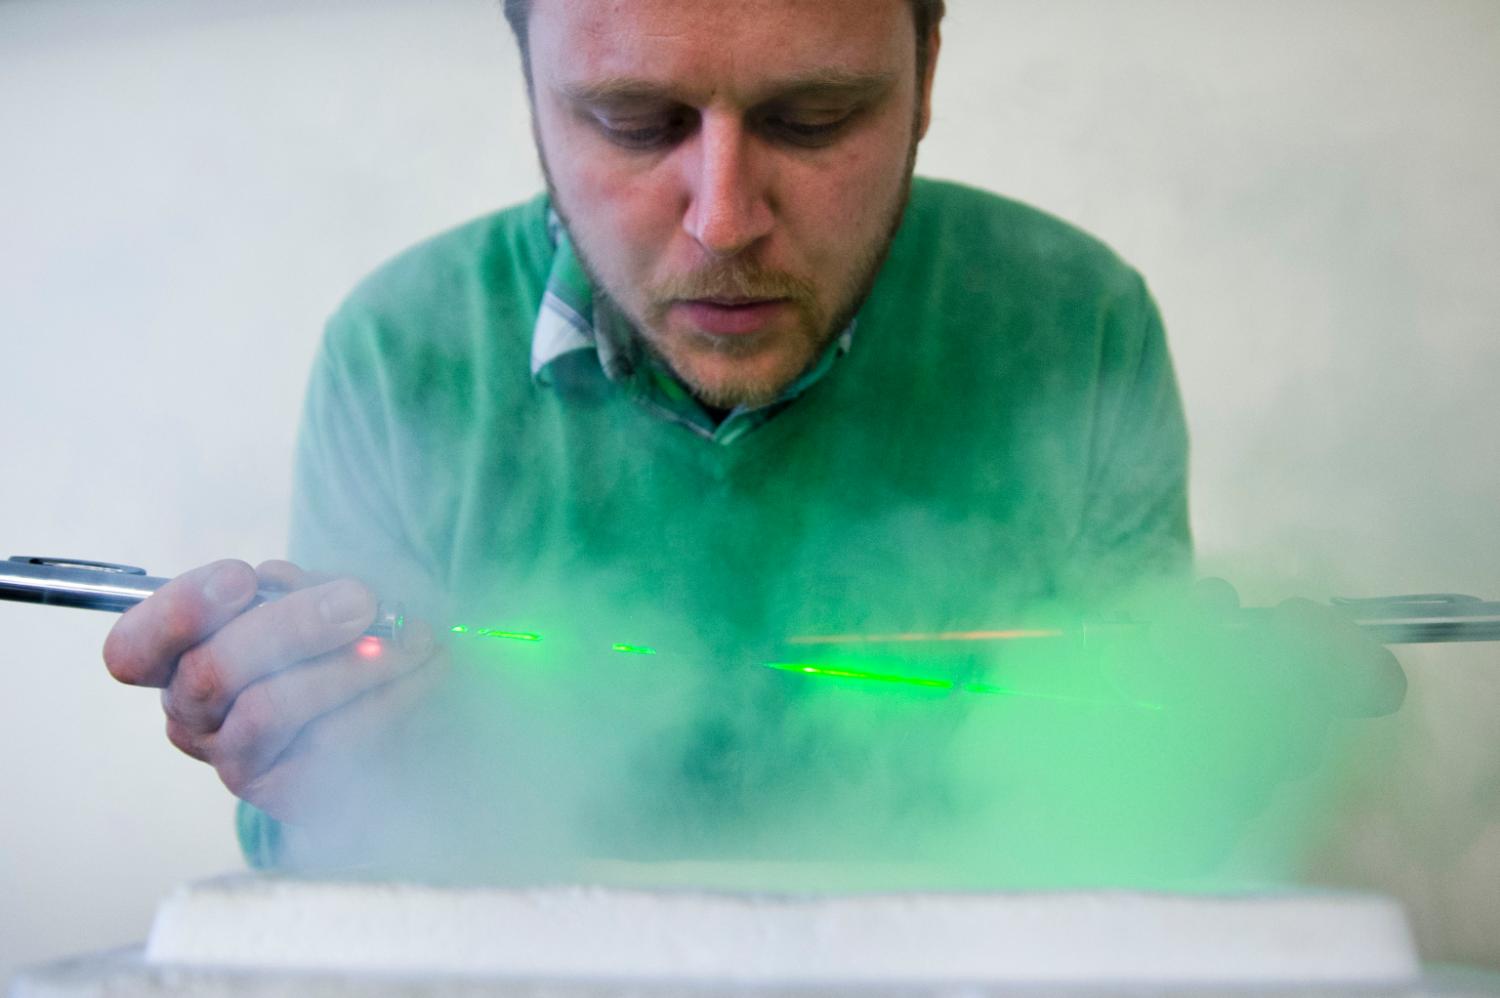 A man with green lasers or gases